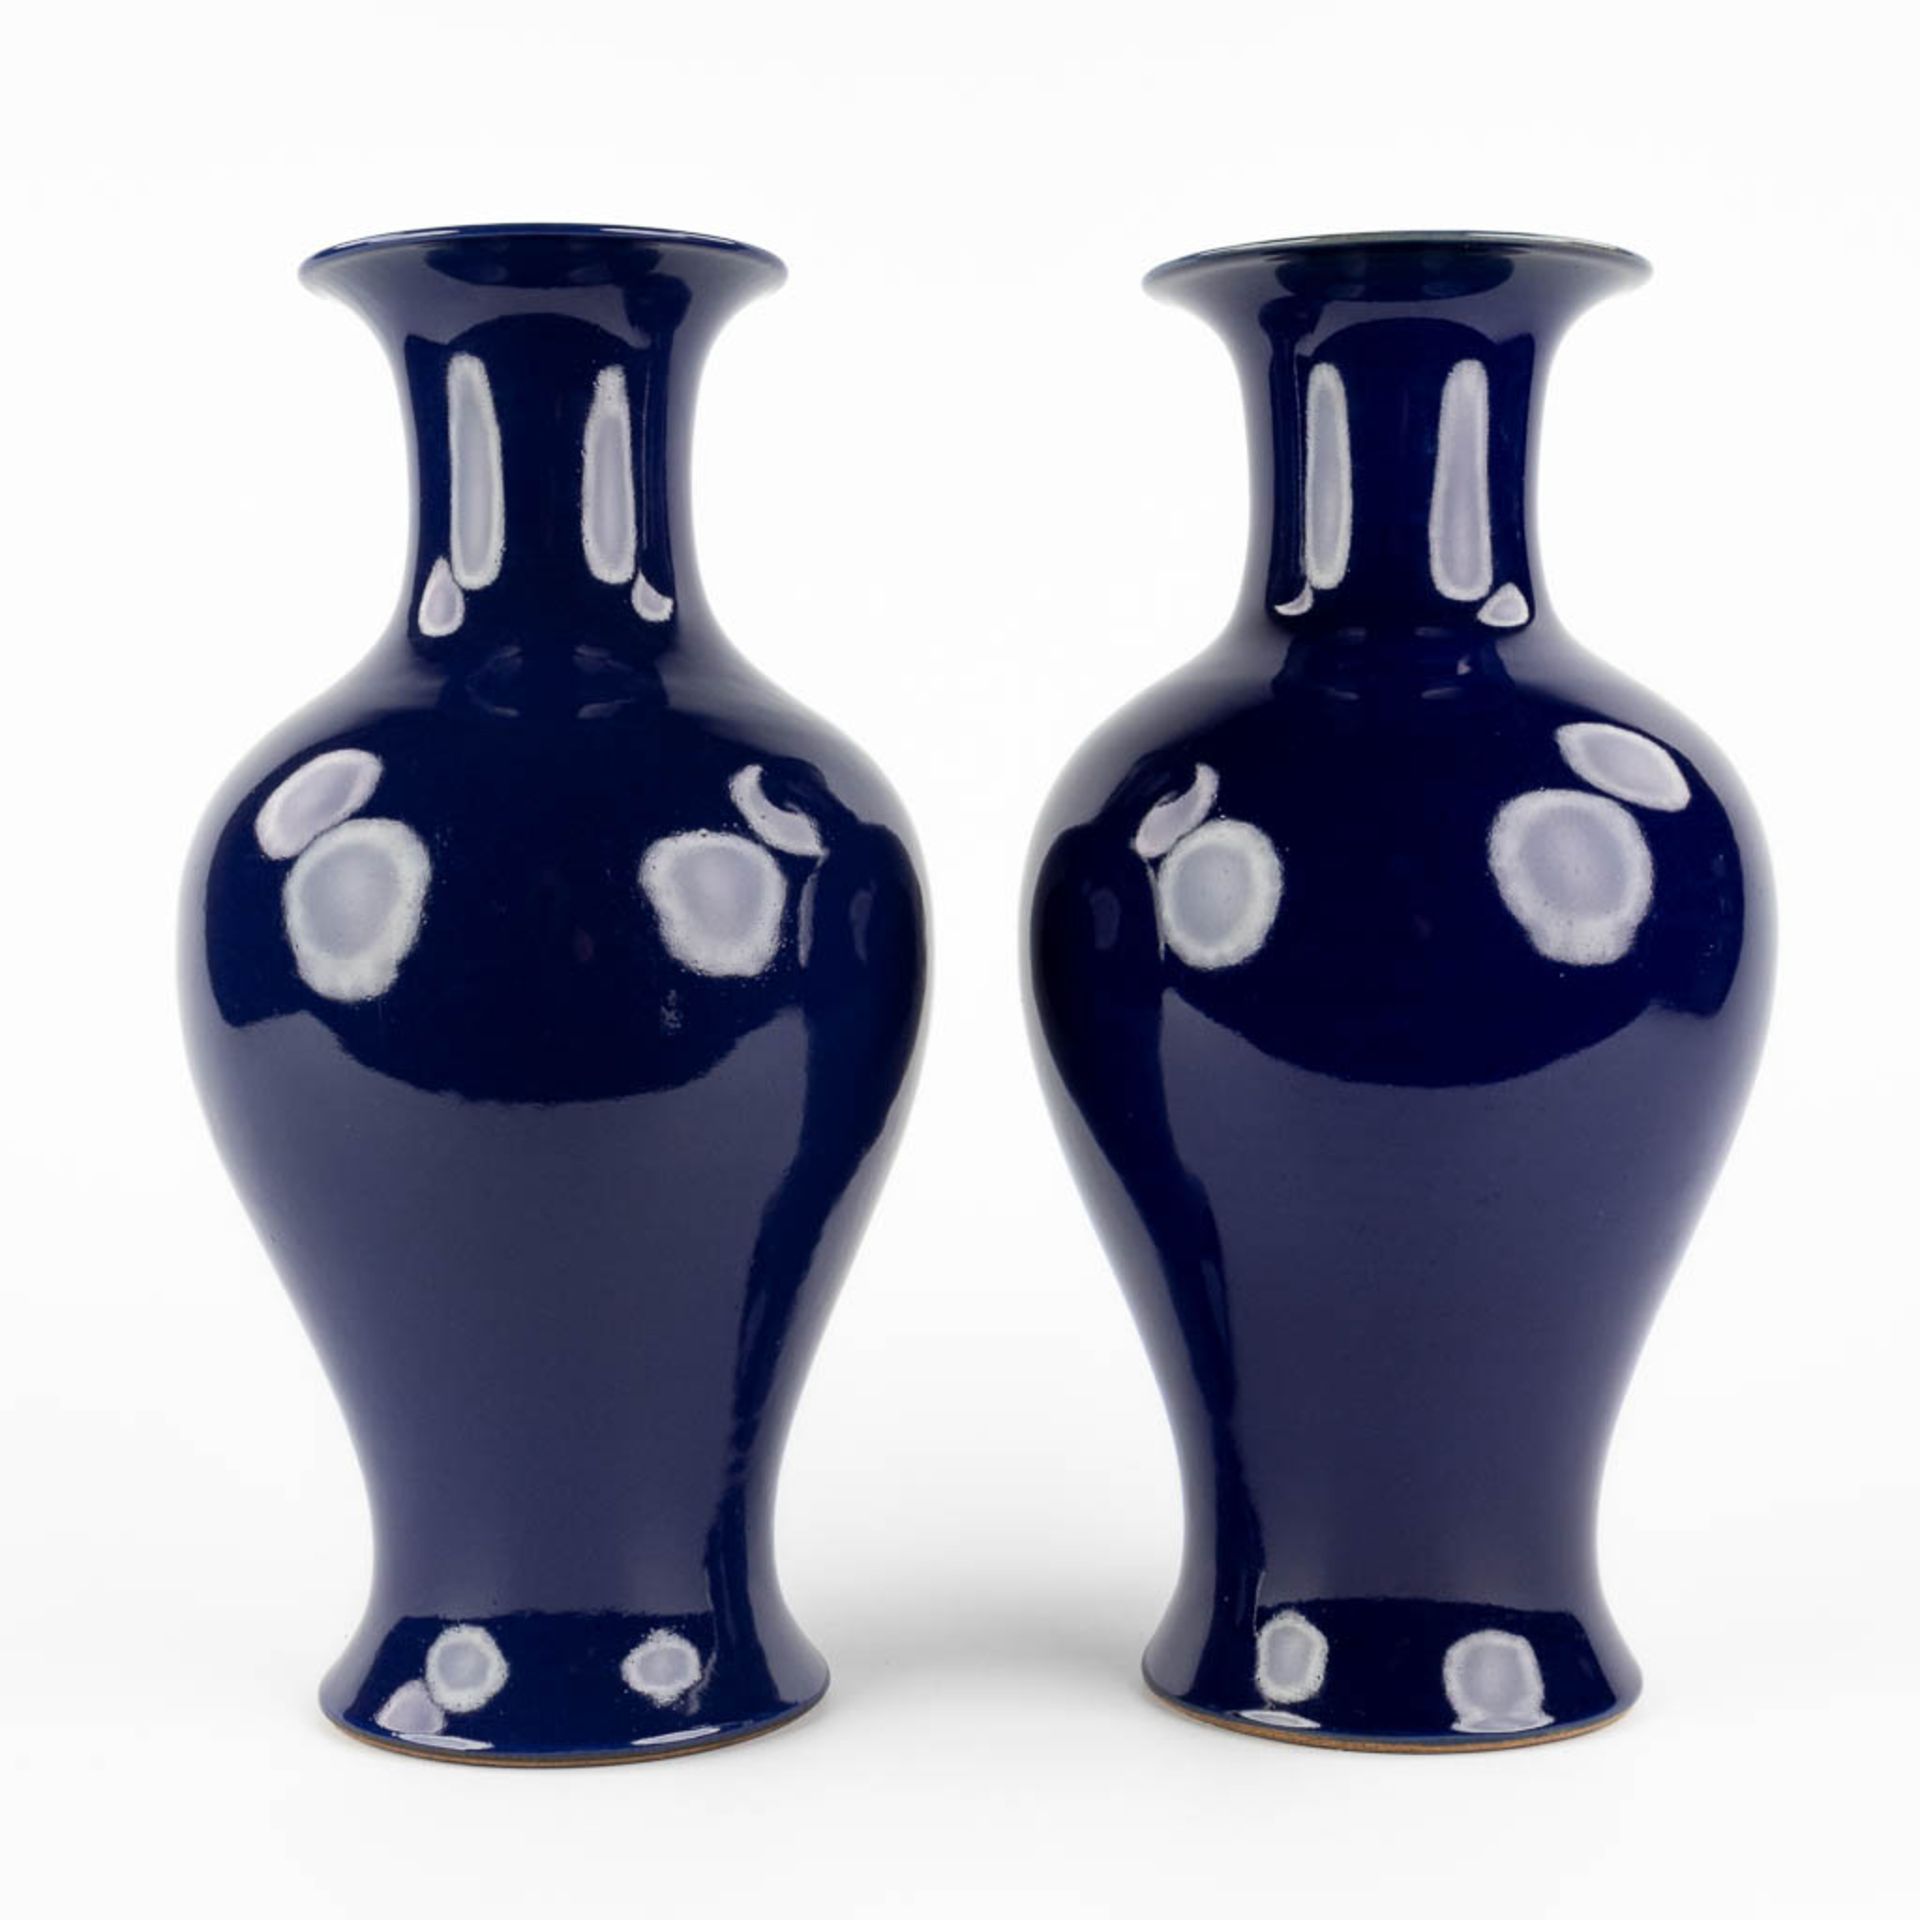 A pair of decorative Chinese blue-glazed vases. 20th C. (H:36 x D:18 cm) - Image 3 of 9